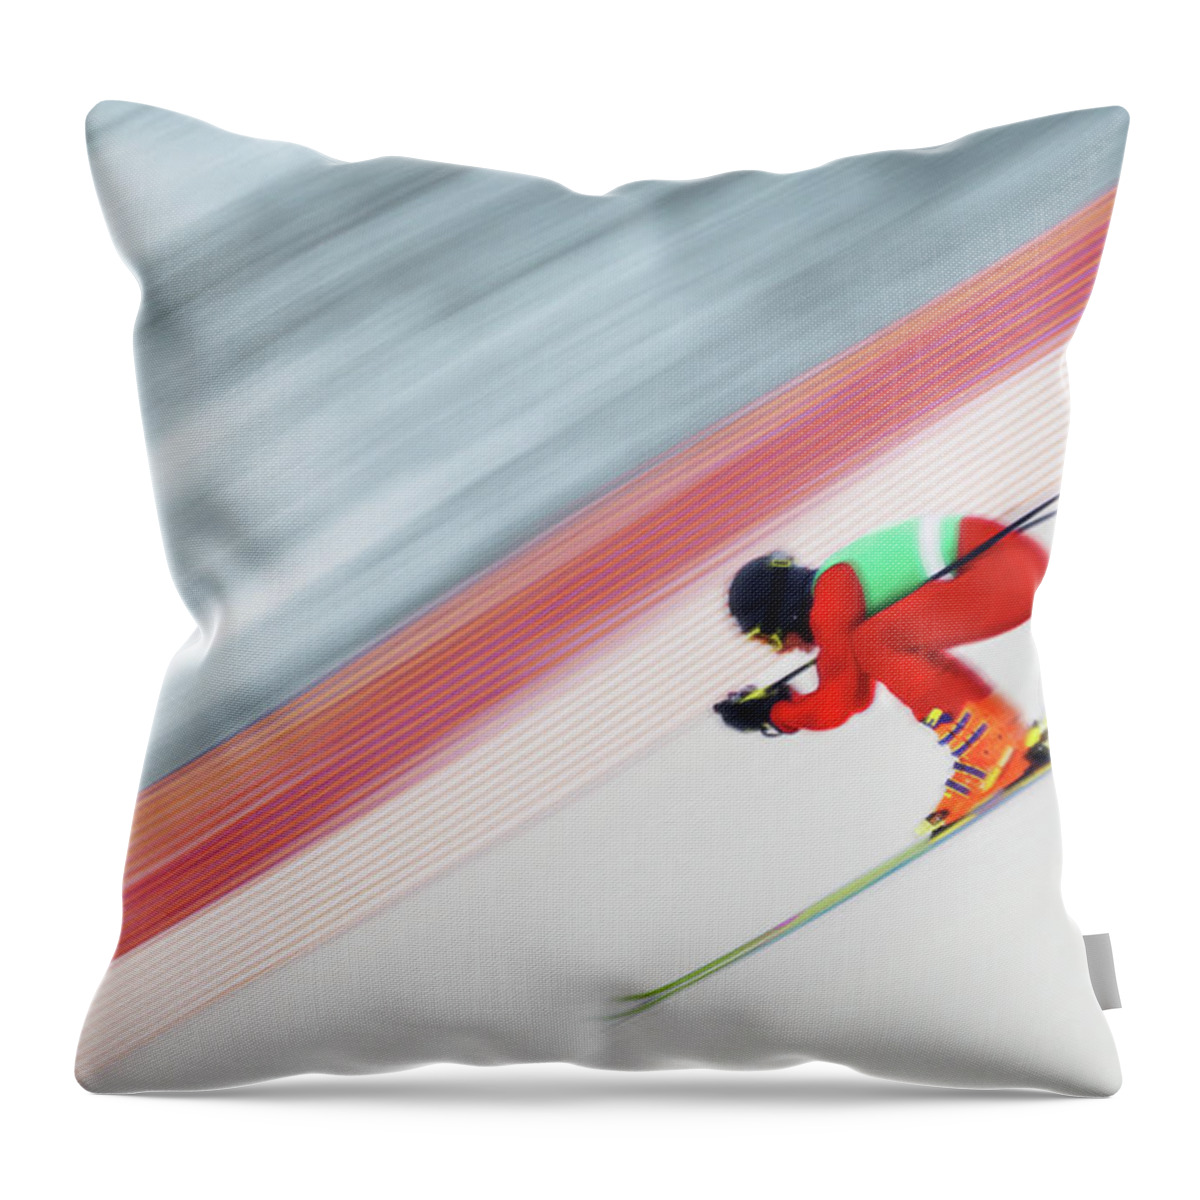 Alpine Skiing Throw Pillow featuring the photograph Downhill Ski Racer Speeding Down by David Madison